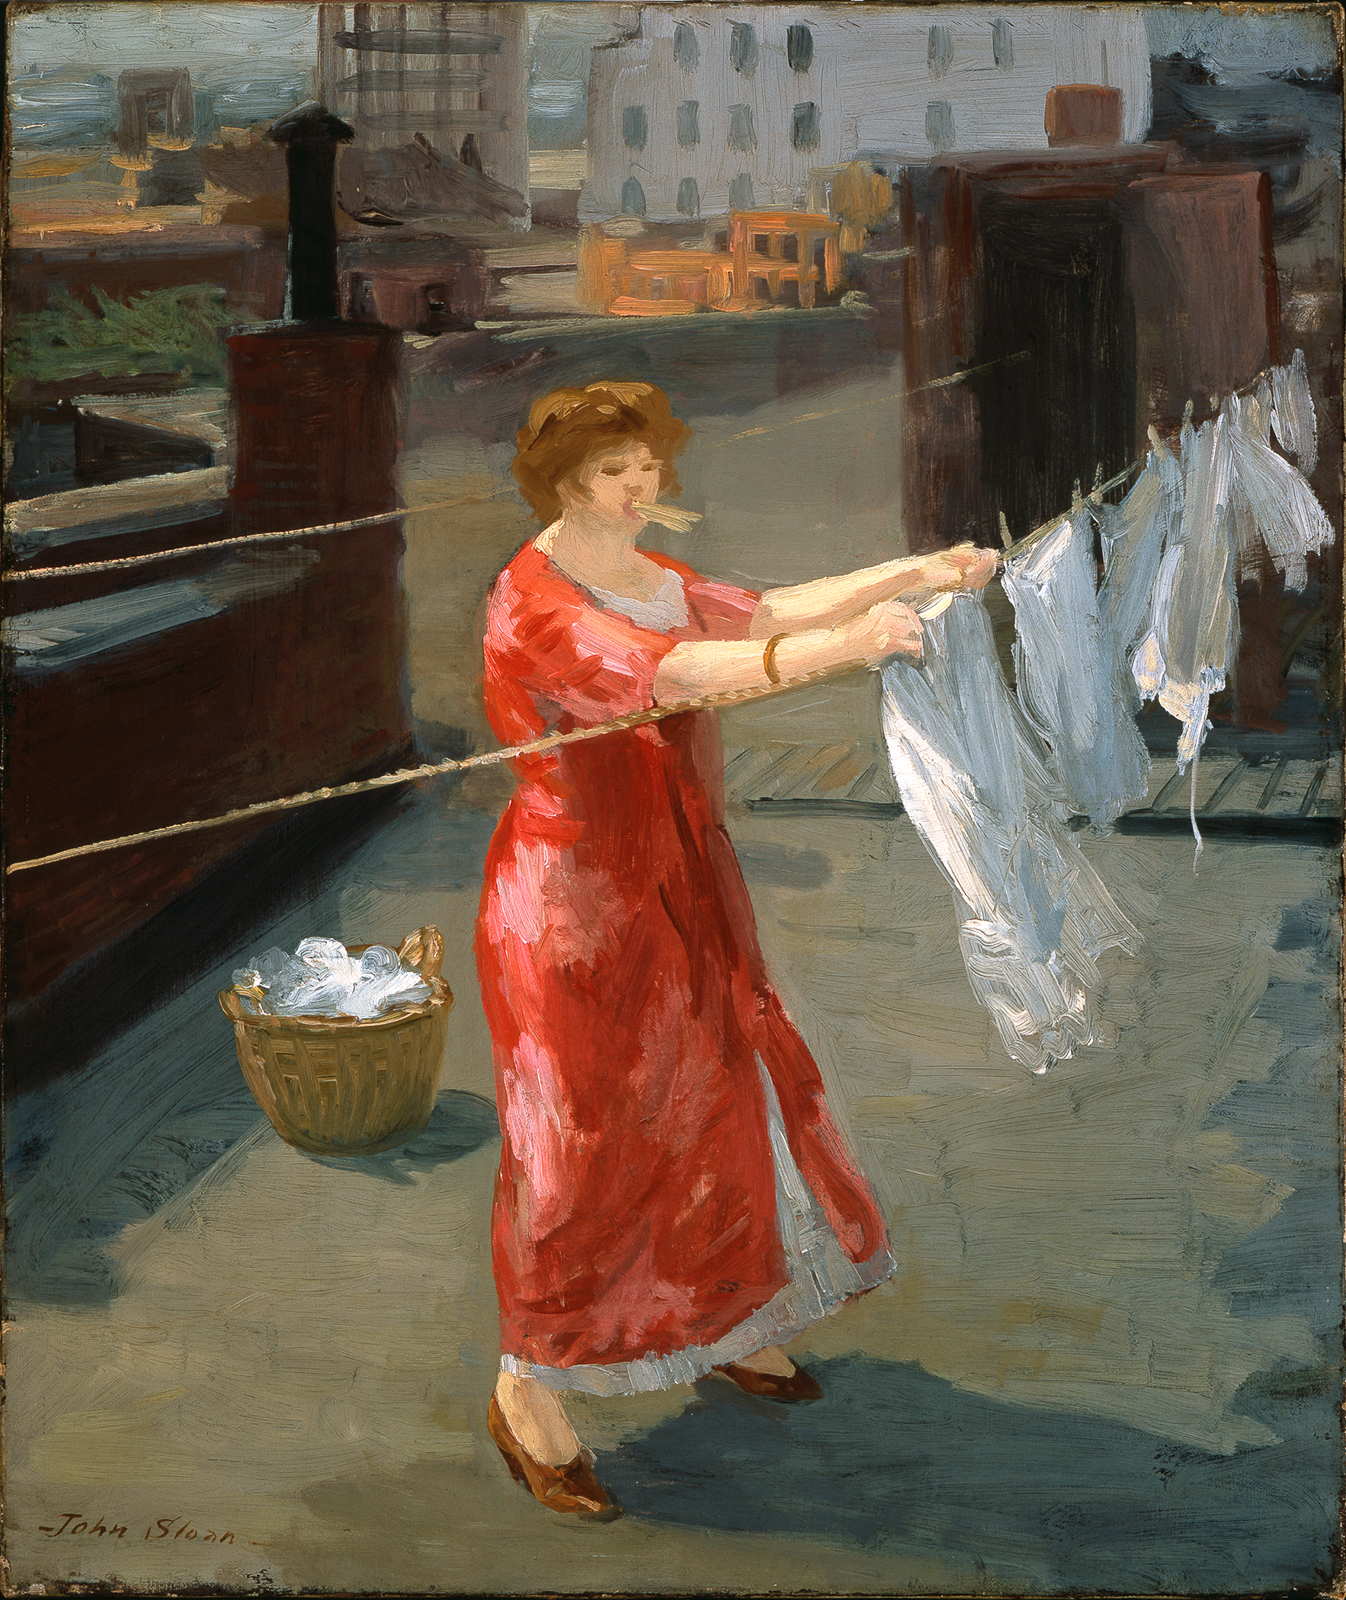 John Sloan, Red Kimono on the Roof, 1912, oil on canvas, 24 x 20 inches. Indianapolis Museum of Art at Newfields, James E. Roberts Fund, 54.55